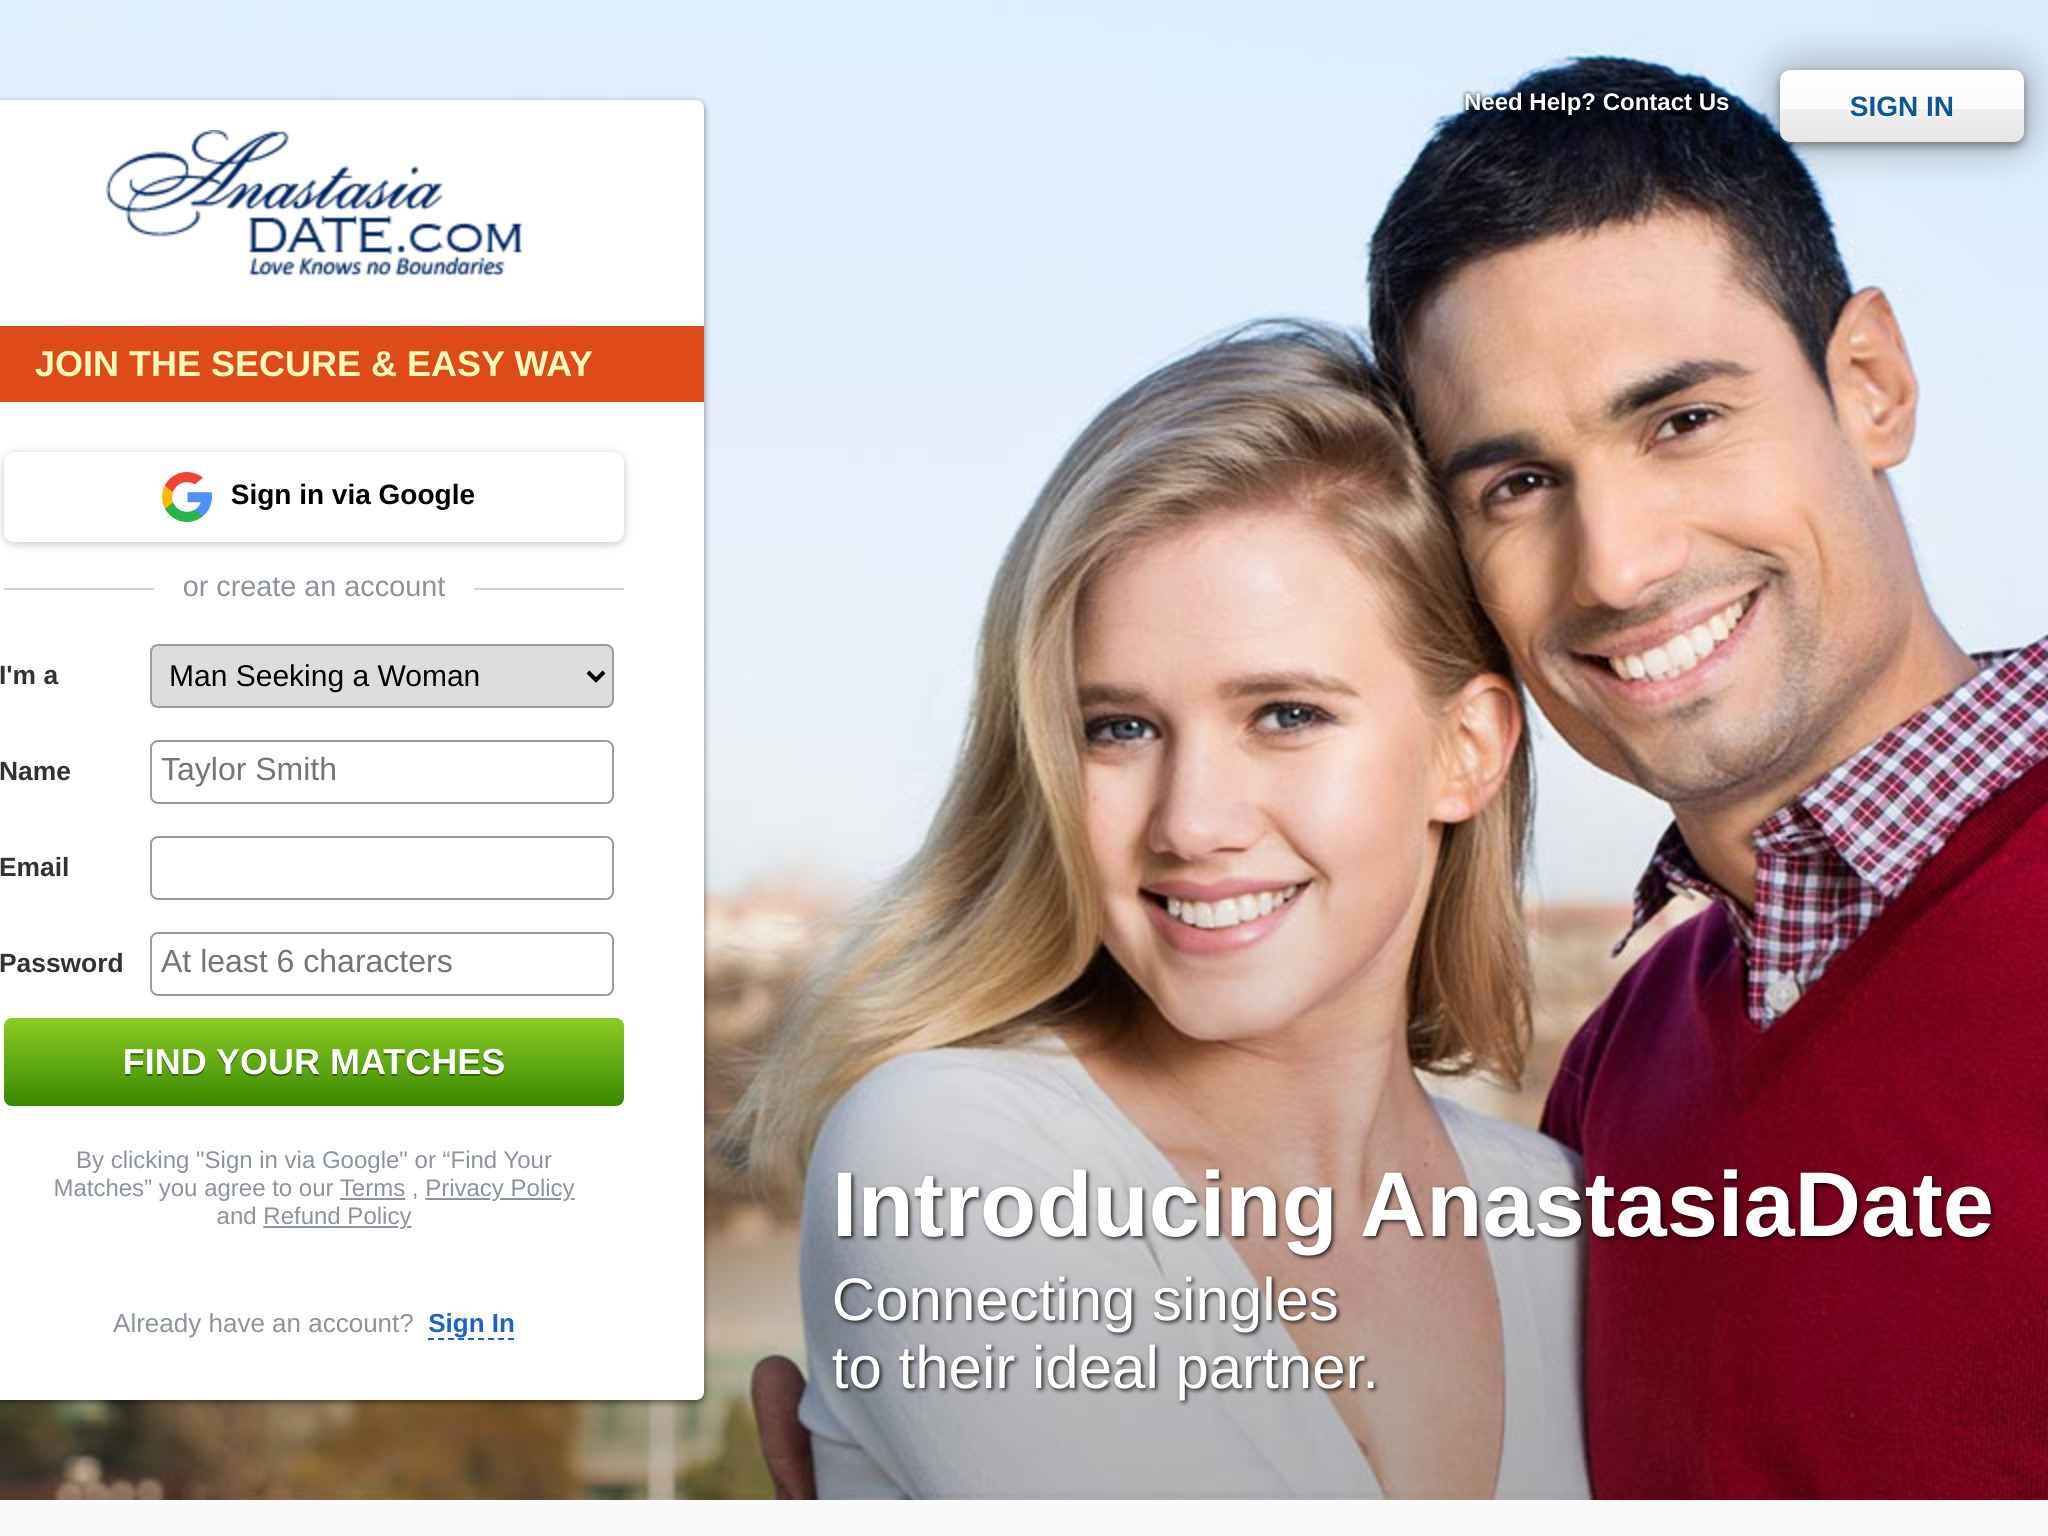 Seeking Something Special? – Check Our AnastasiaDate Review